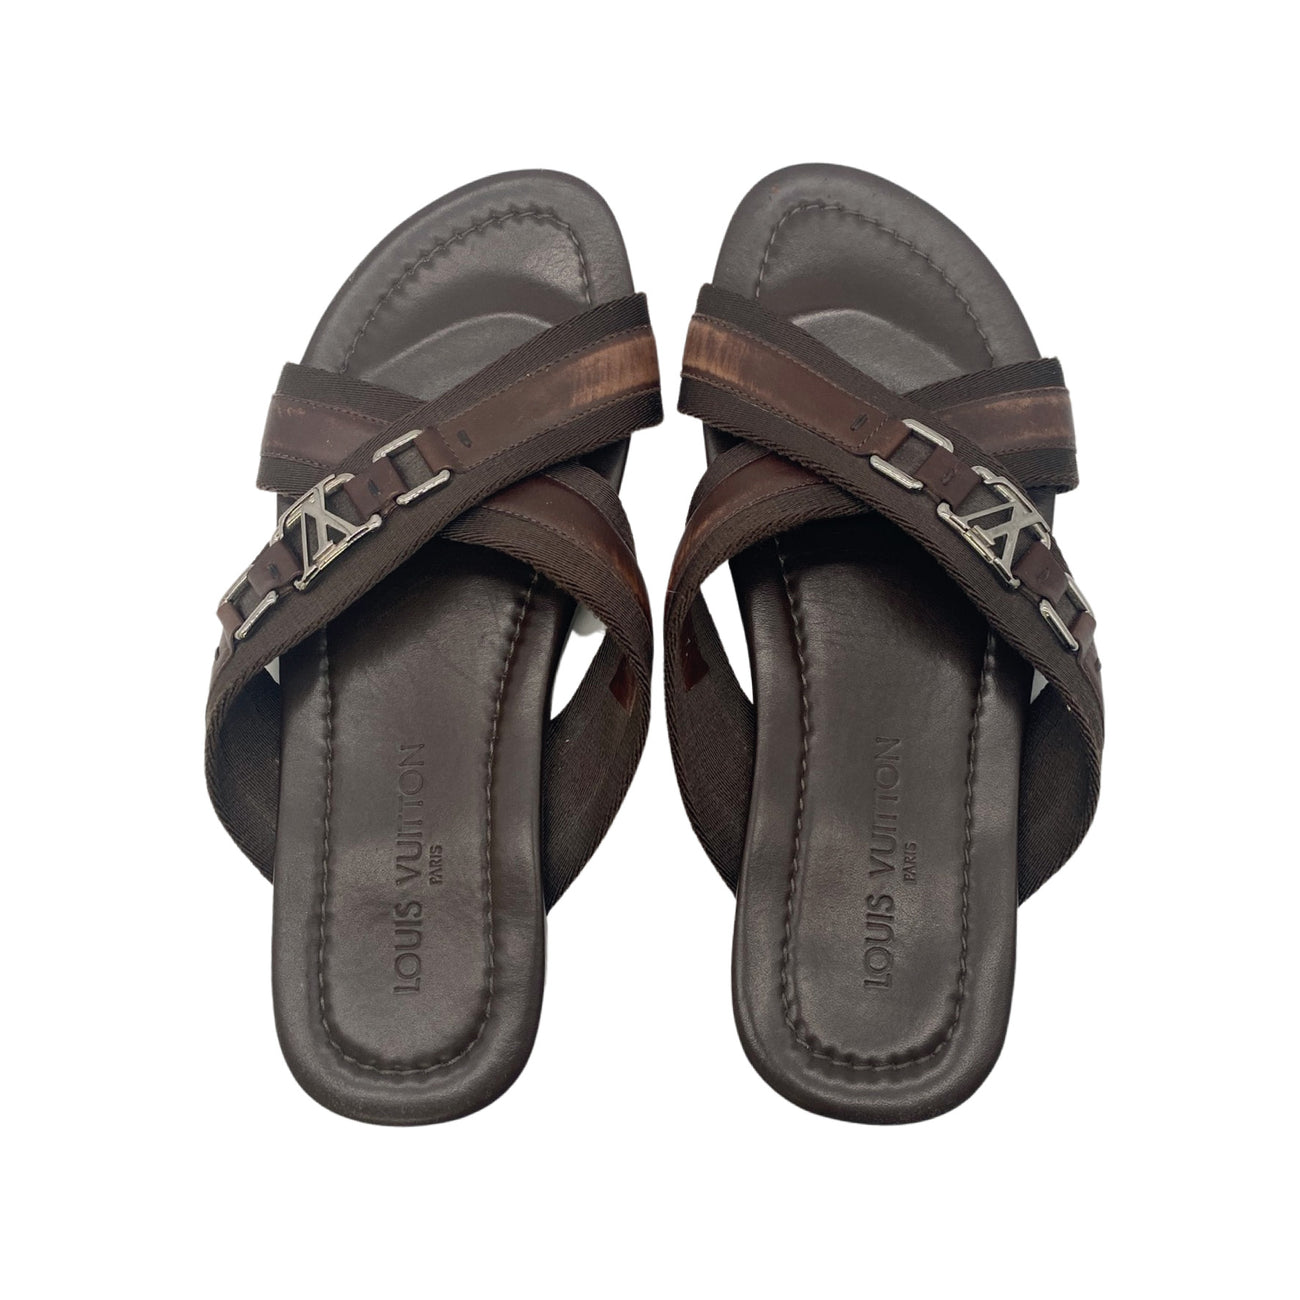 Leather sandals Louis Vuitton Brown size 43 EU in Leather - 32243742